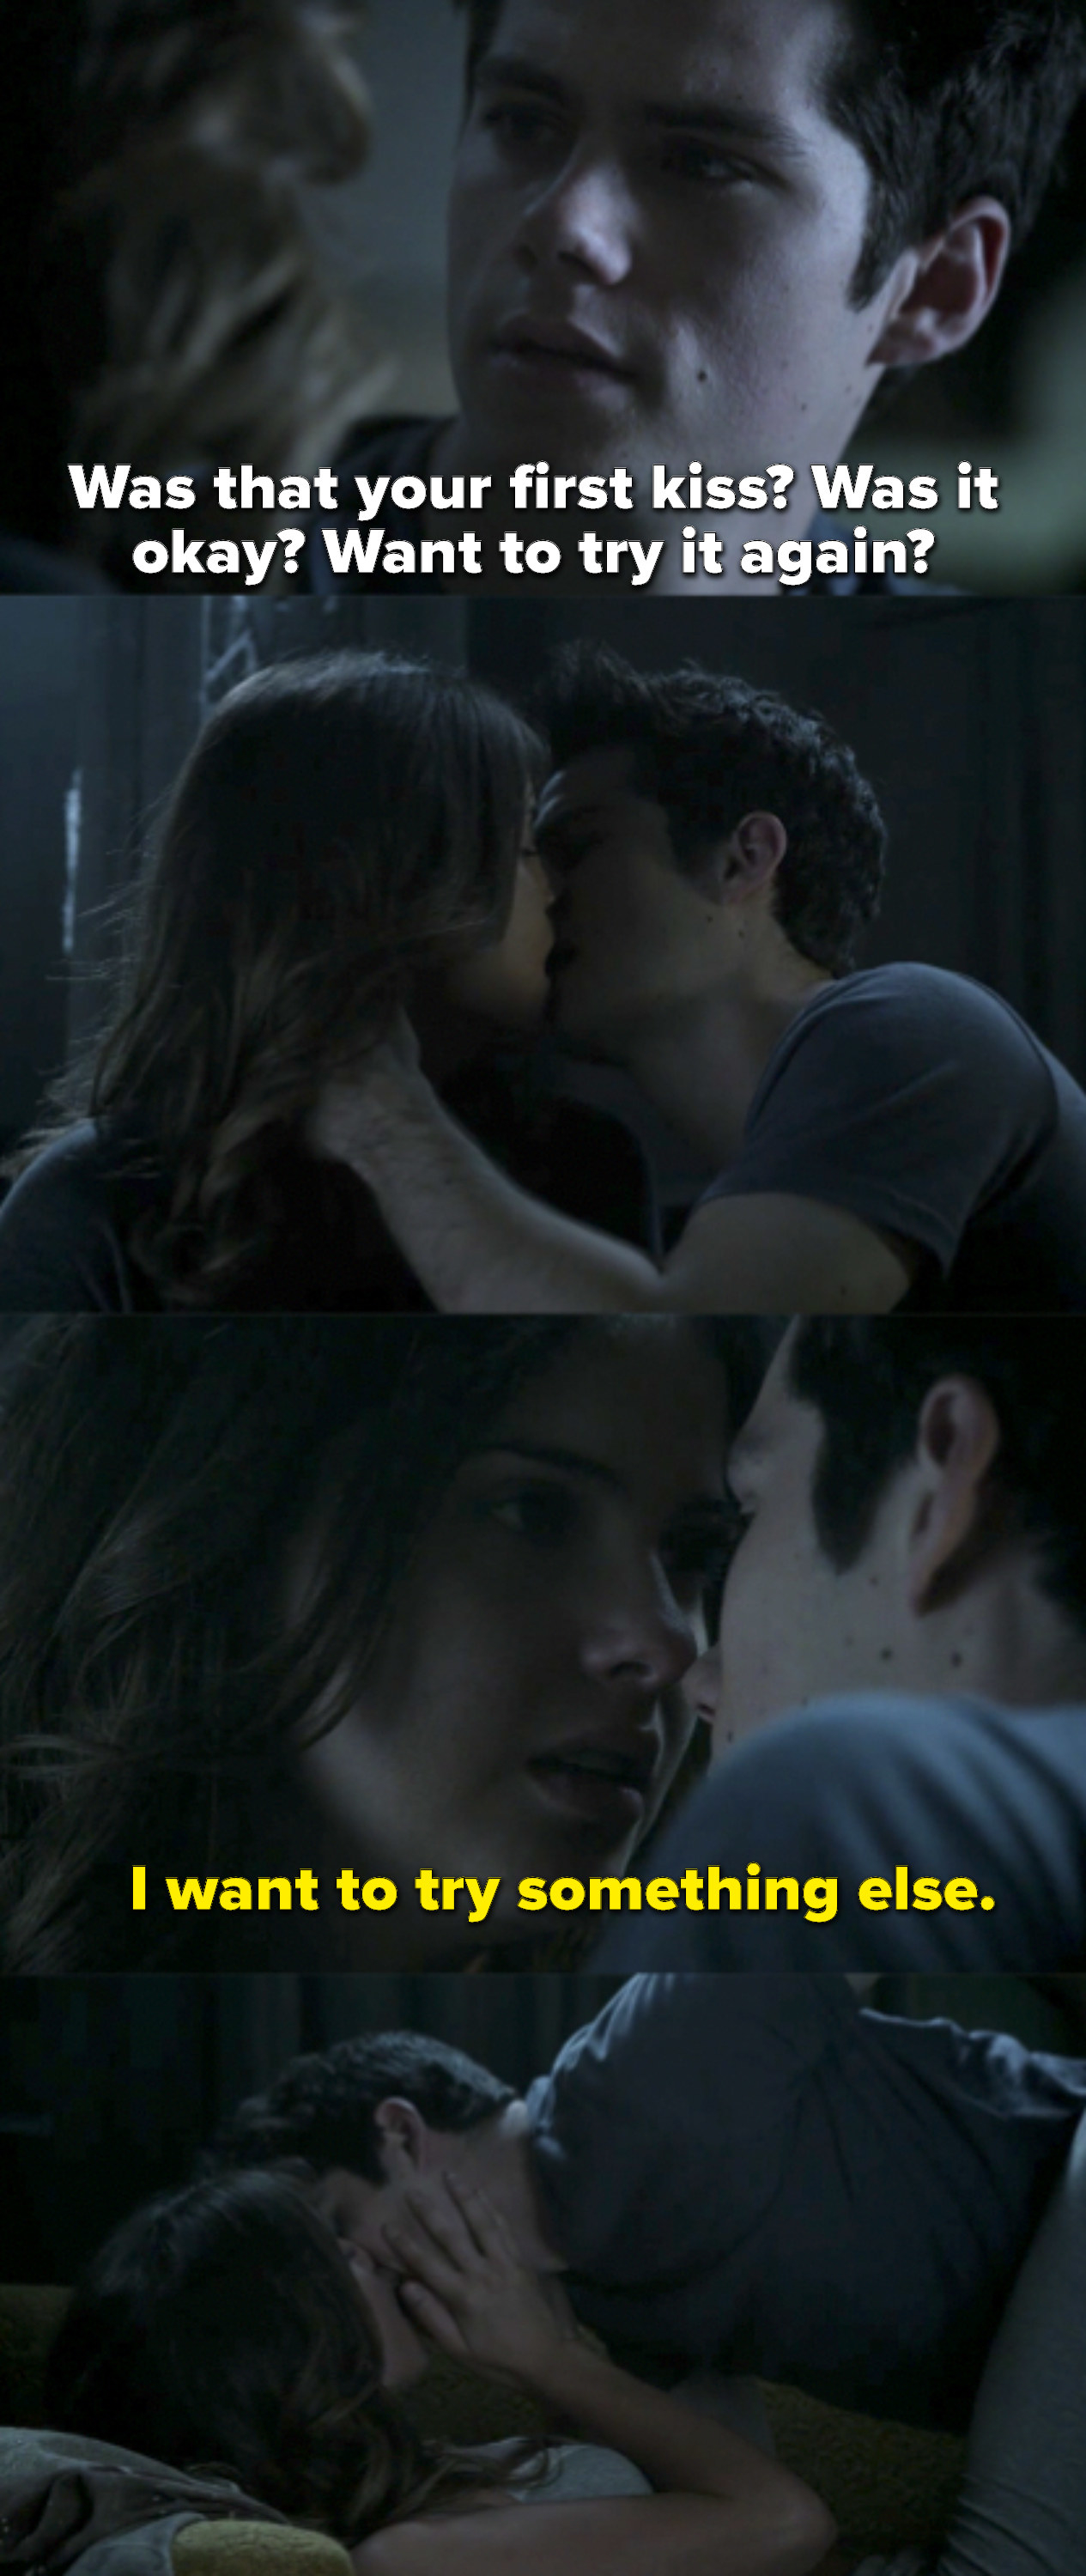 Stiles asks if their kiss was Malia&#x27;s first, and she nods, so he asks if she wants to try again. They kiss, and then Malia stops and says she wants to try something else. Then she takes off her shirt and they fall back on the couch.